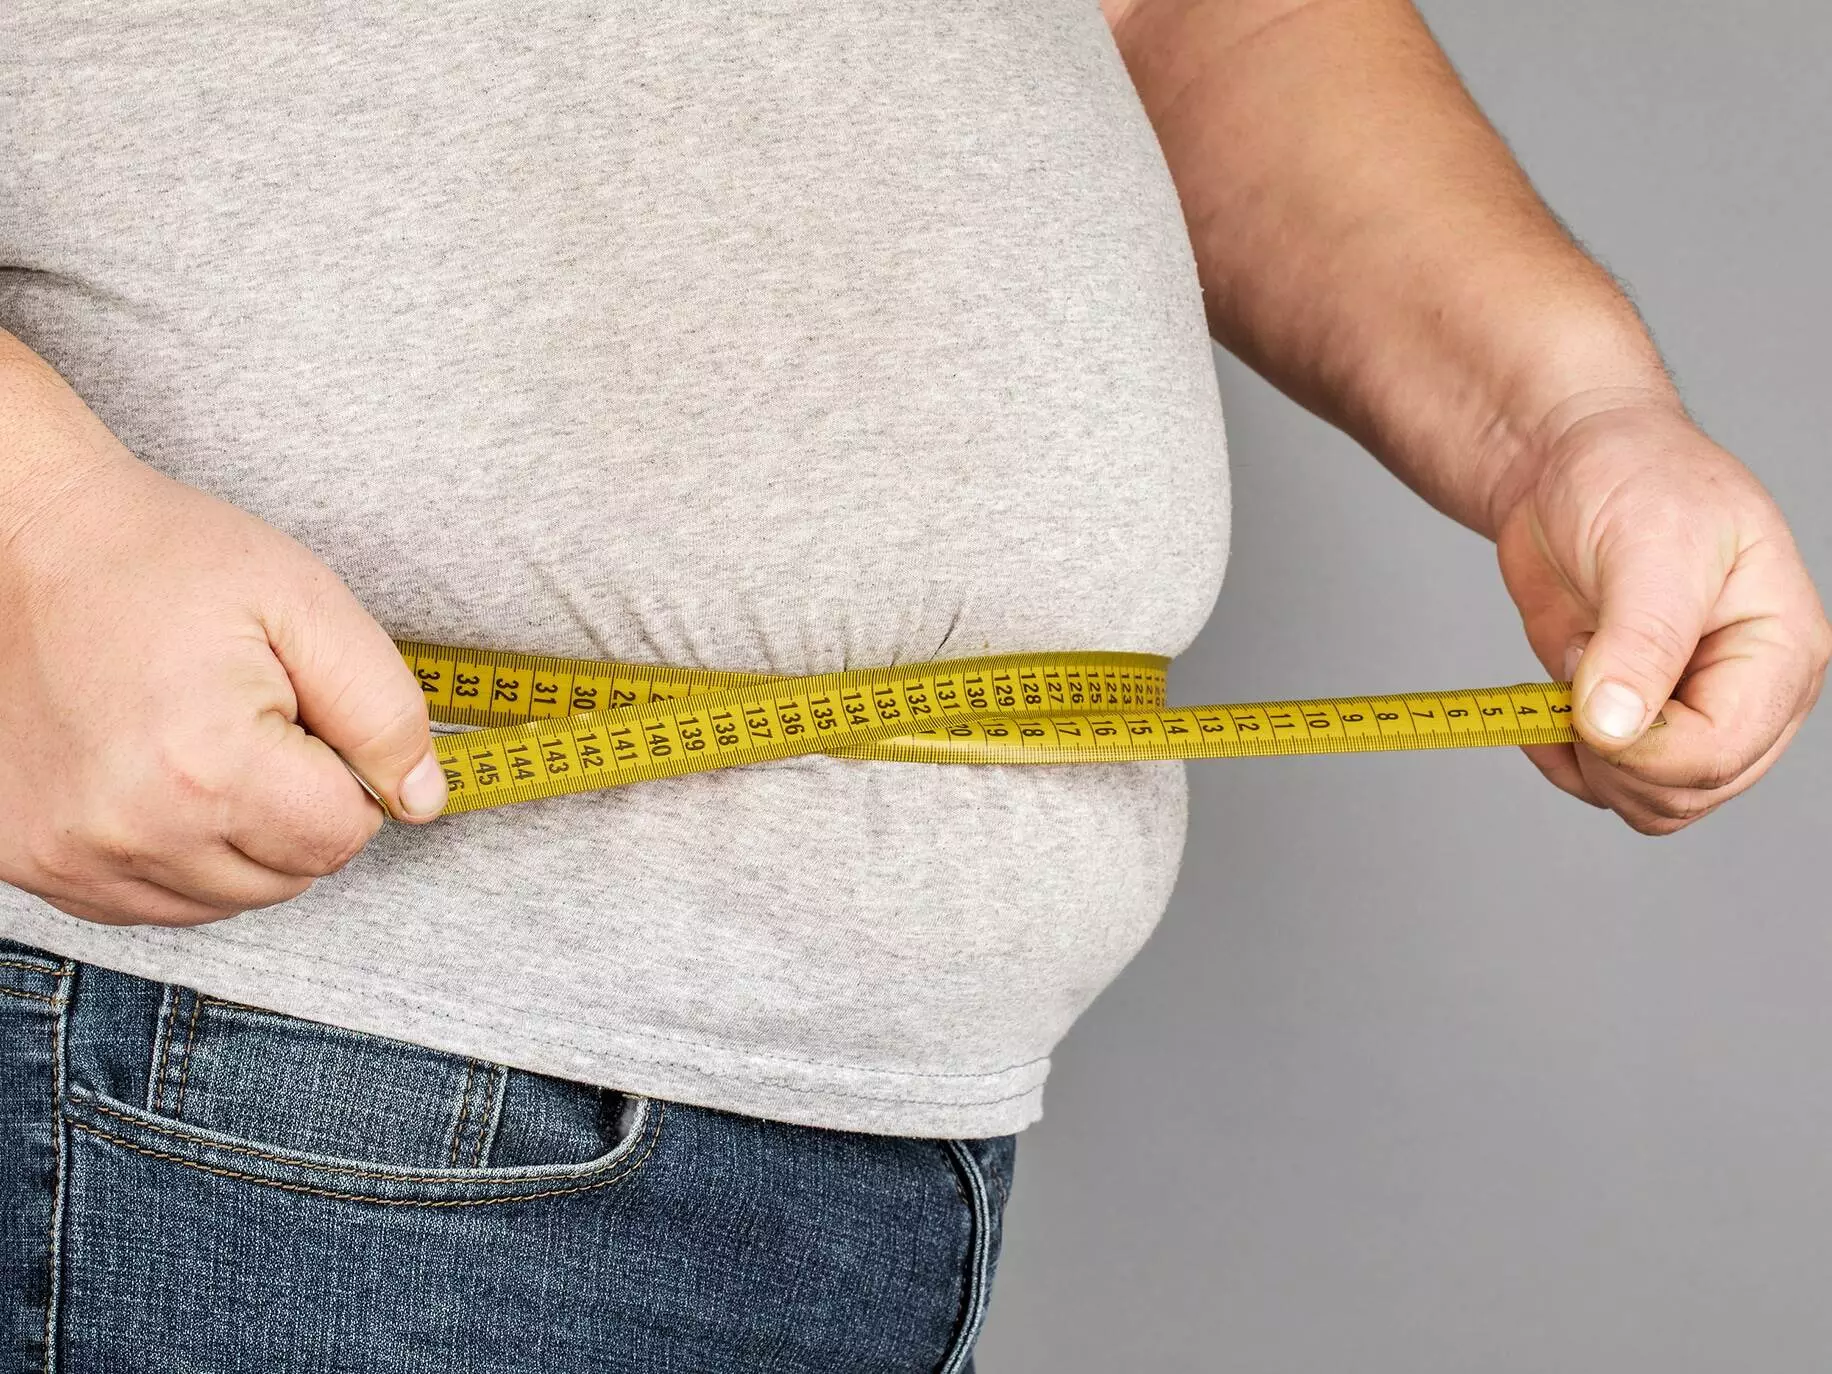 Weight loss in obese boys may protect their reproductive function in future: Study